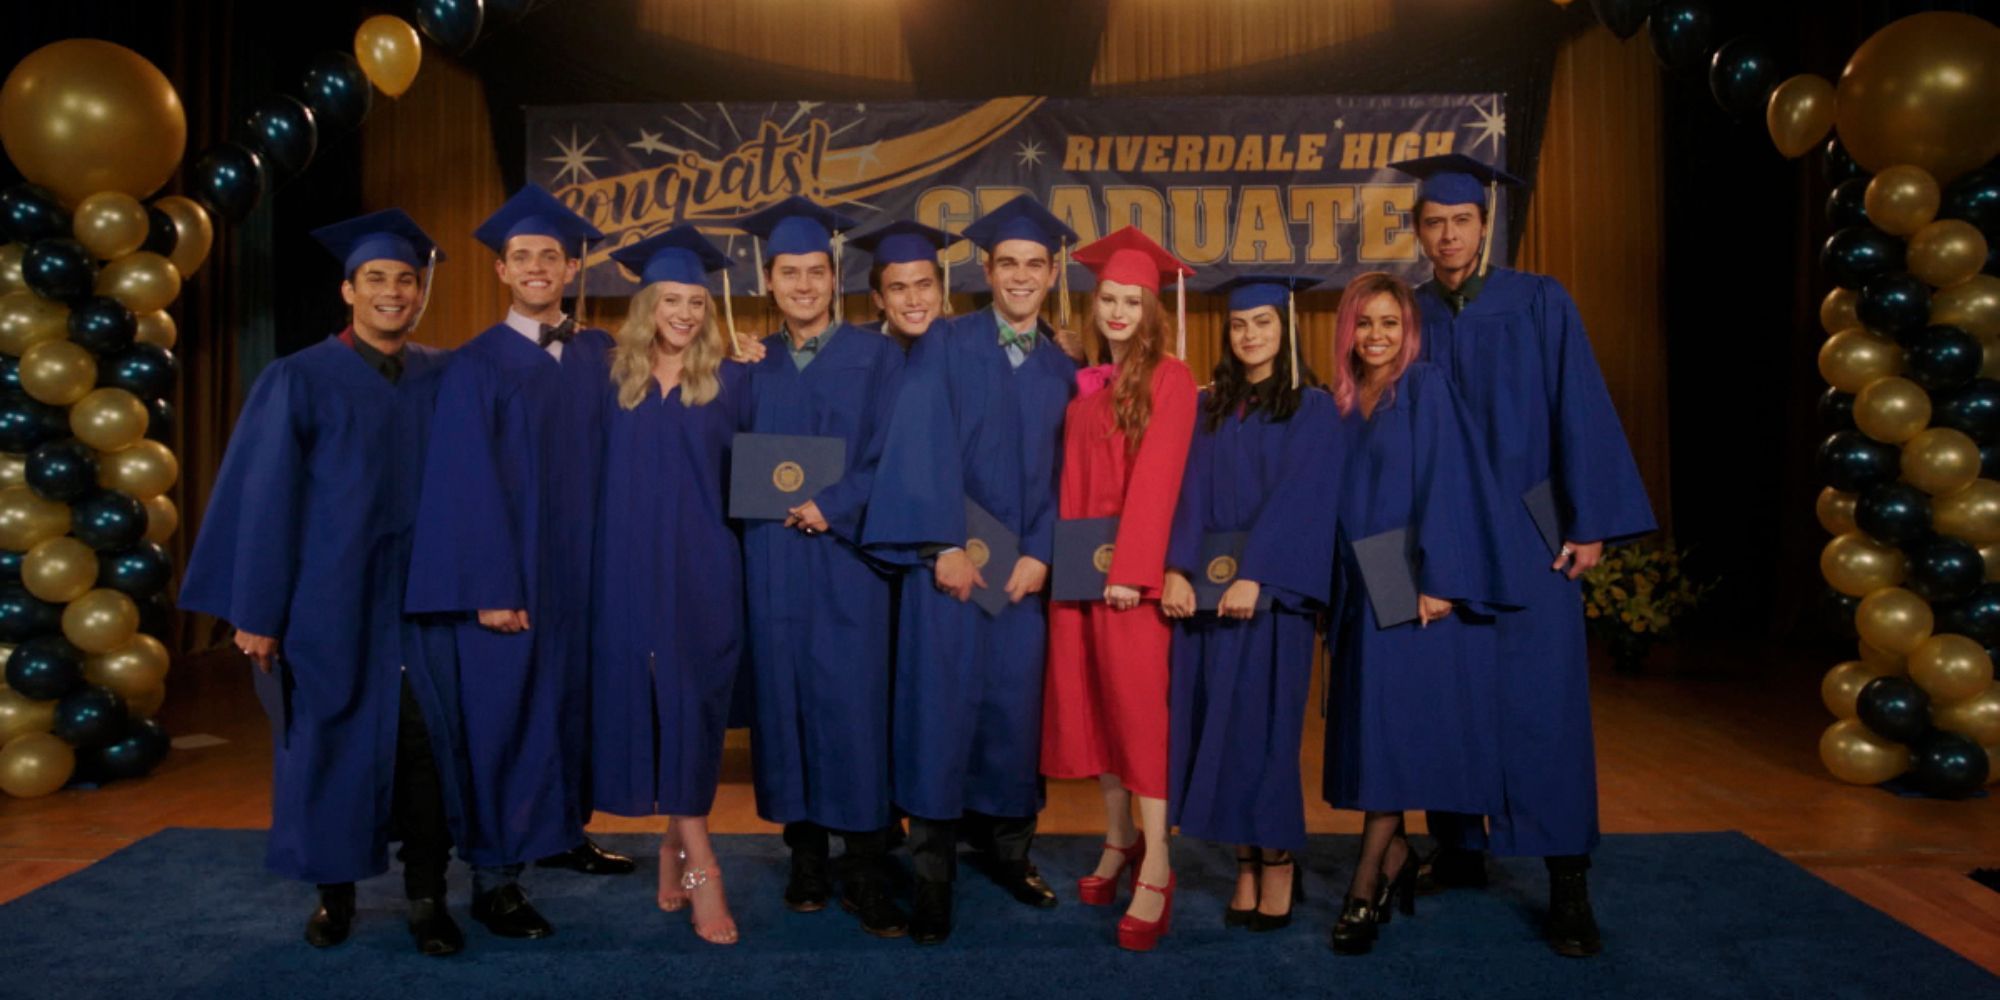 The Riverdale teens in their graduation gowns, standing in a row